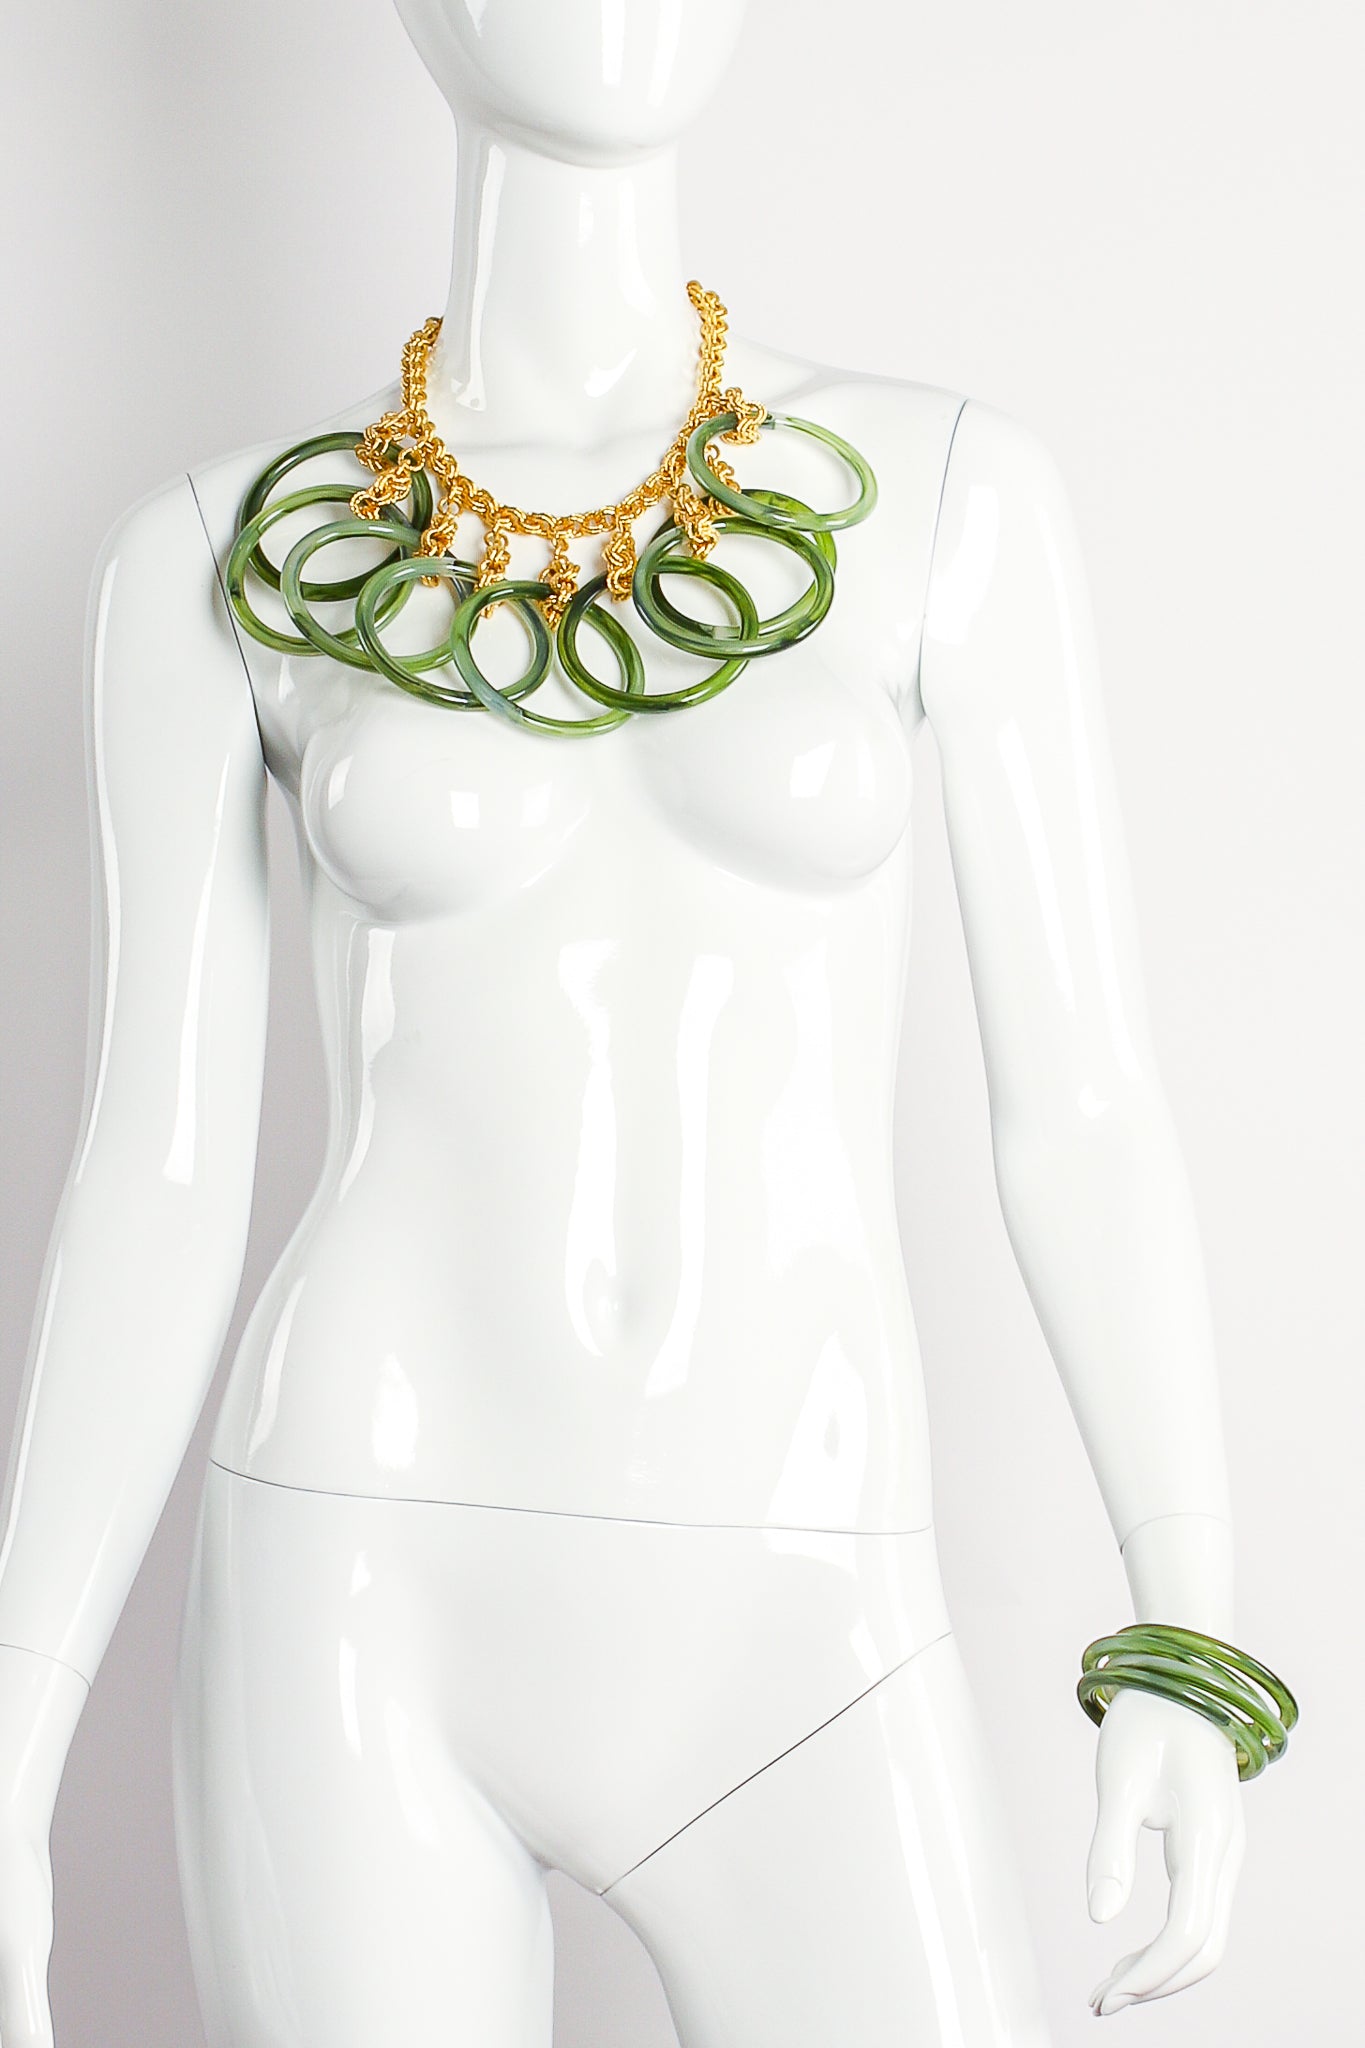 Vintage Julie Rubano Large Lucite Rings Chain Link Necklace with Bangles on Mannequin at Recess LA